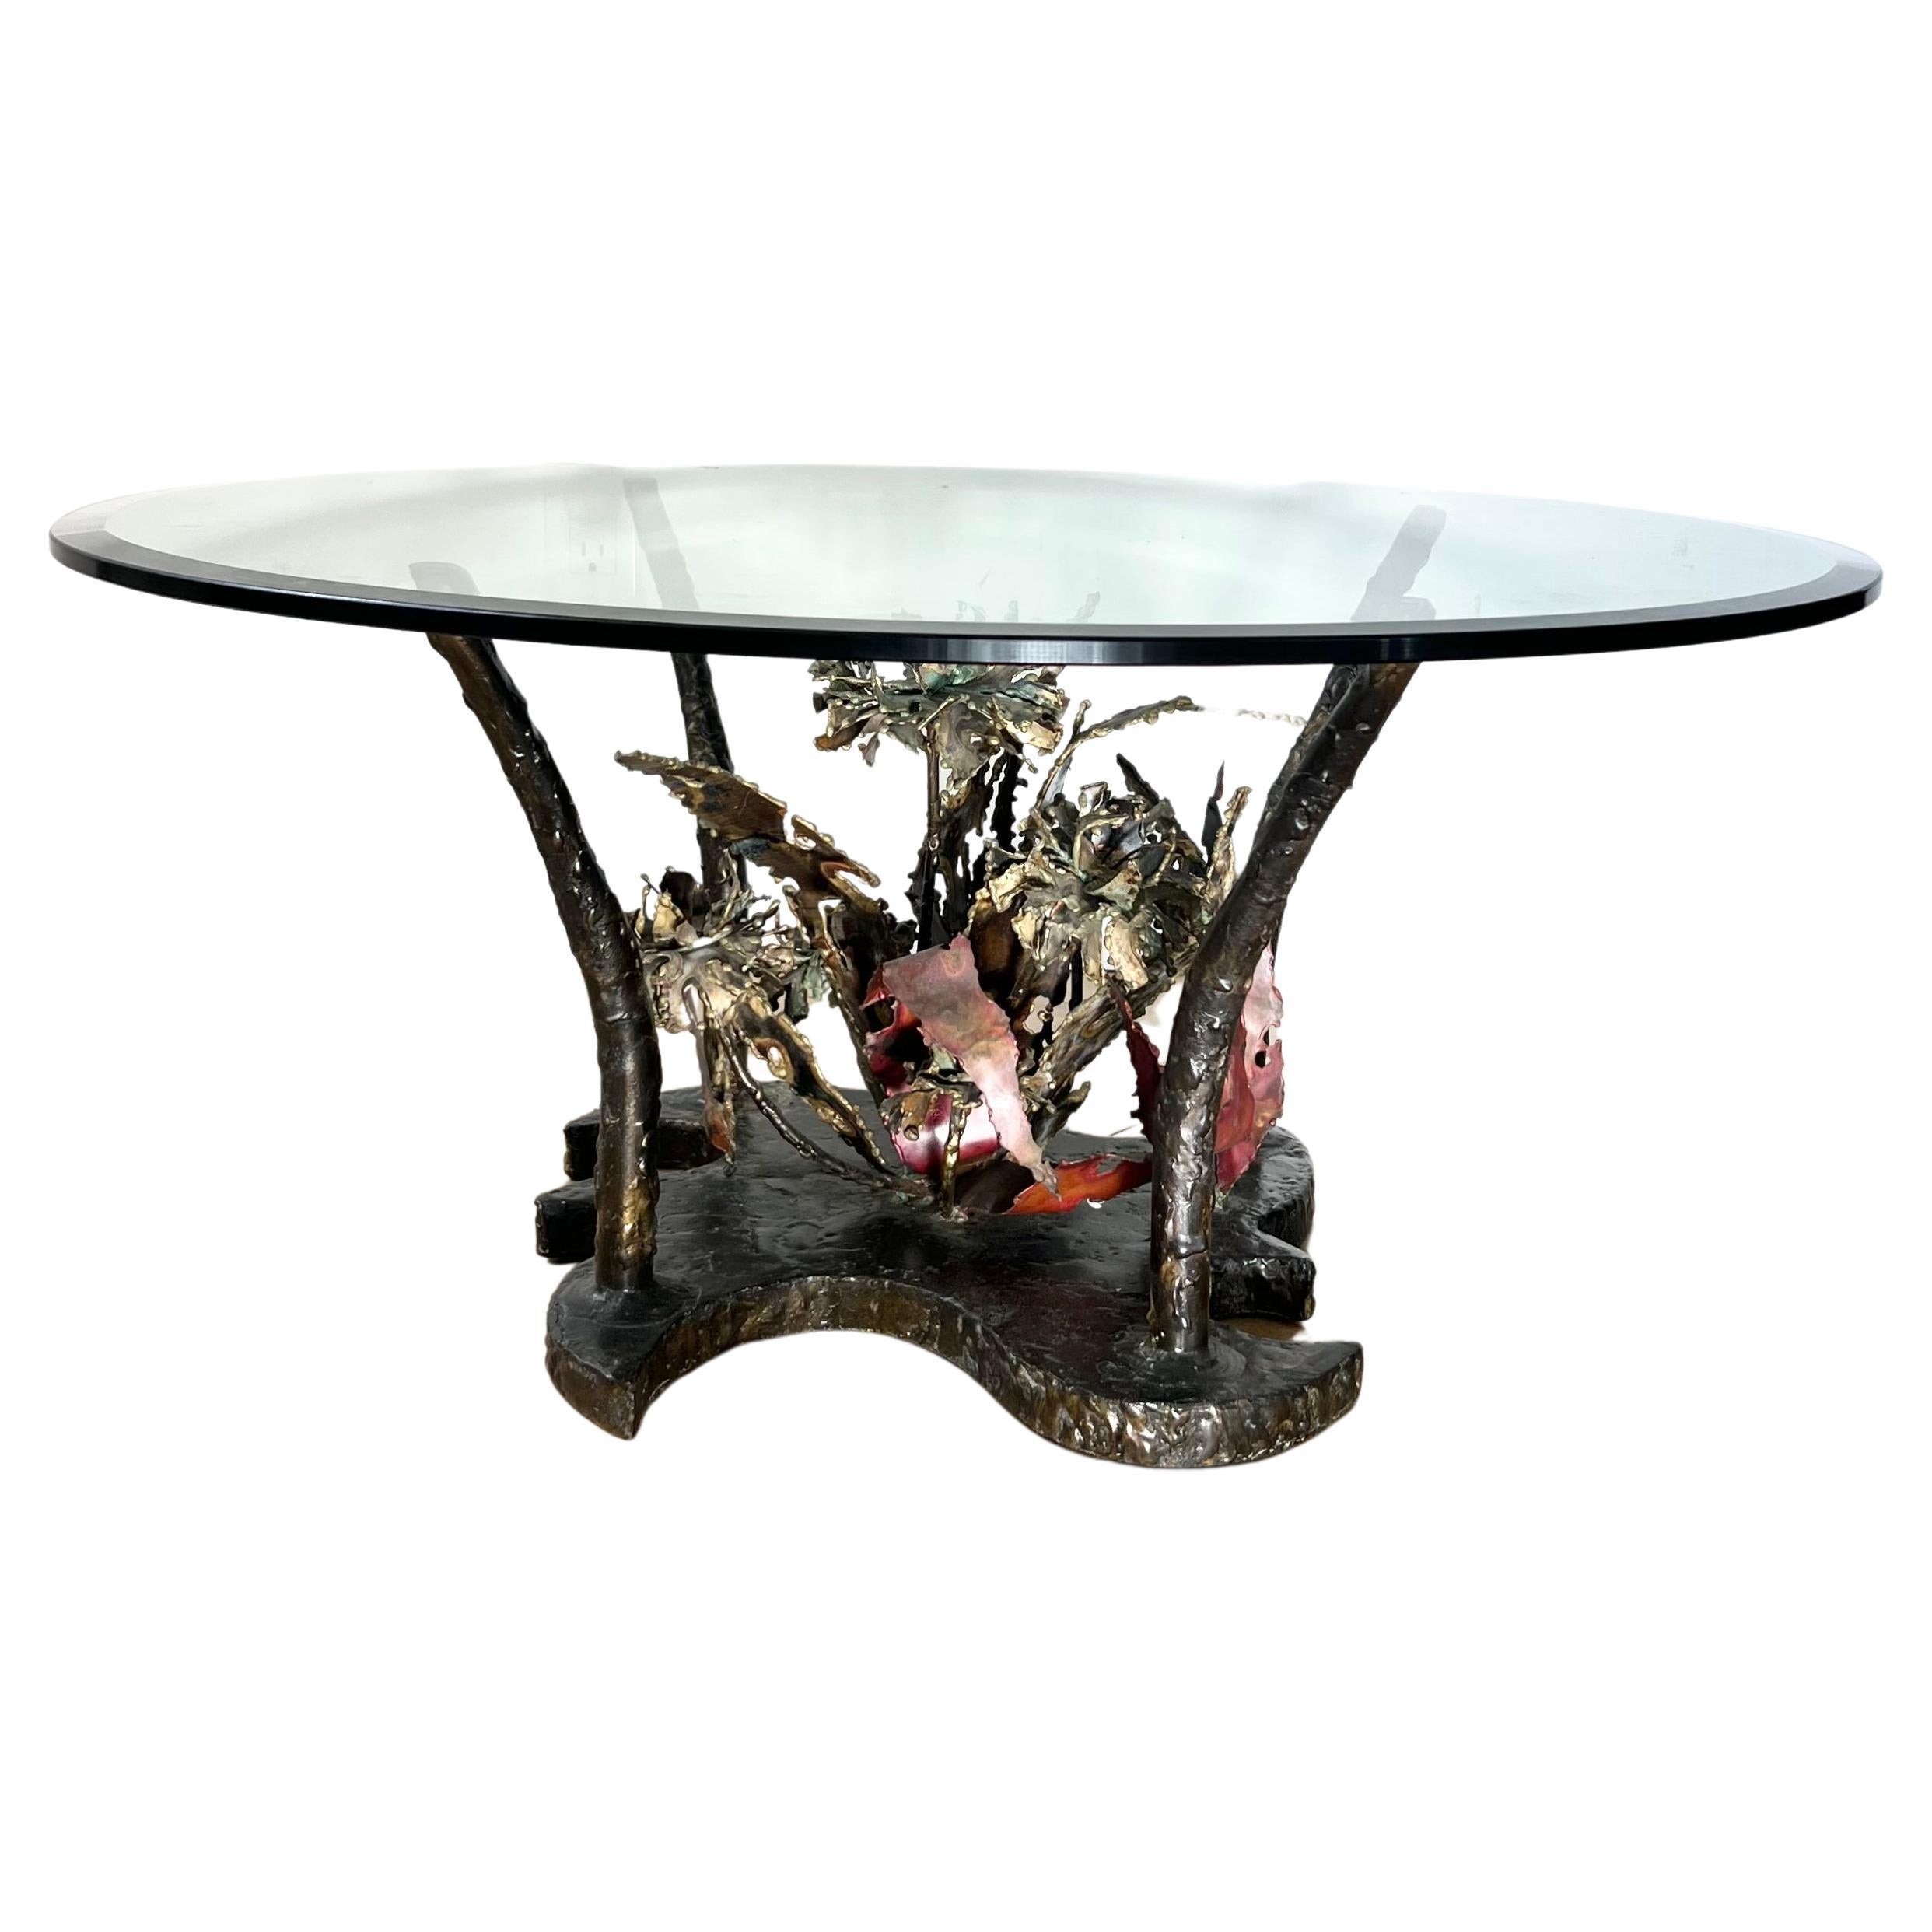 Brutalist Iron and Glass Coffee Table by Silas Seandel, Signed, 1970s For Sale